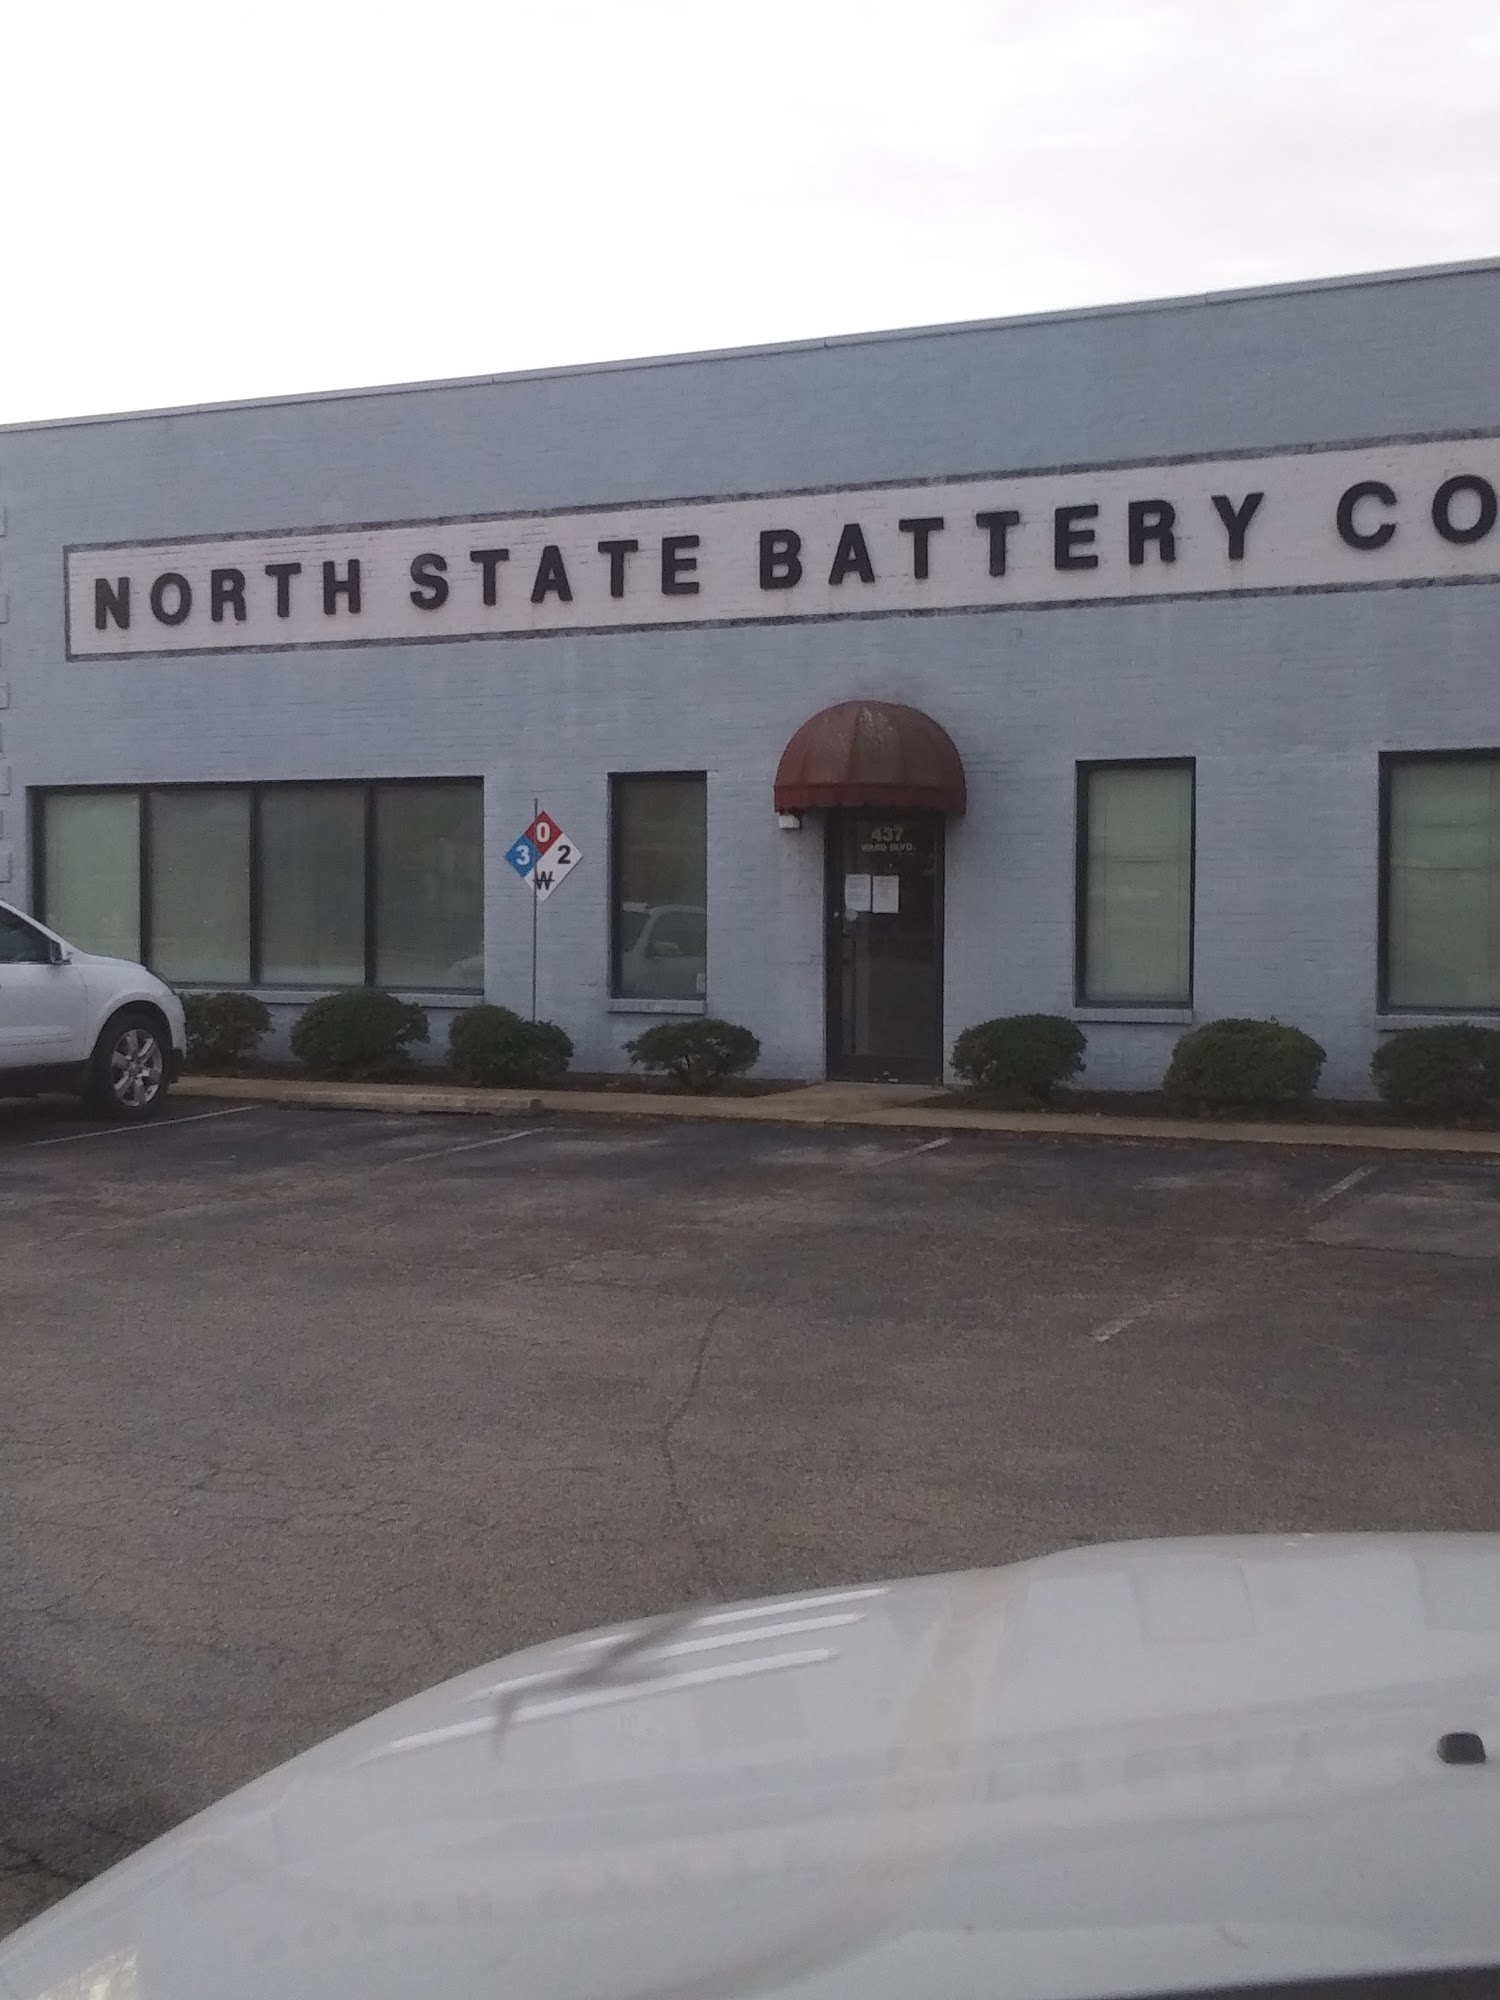 North State Battery Co